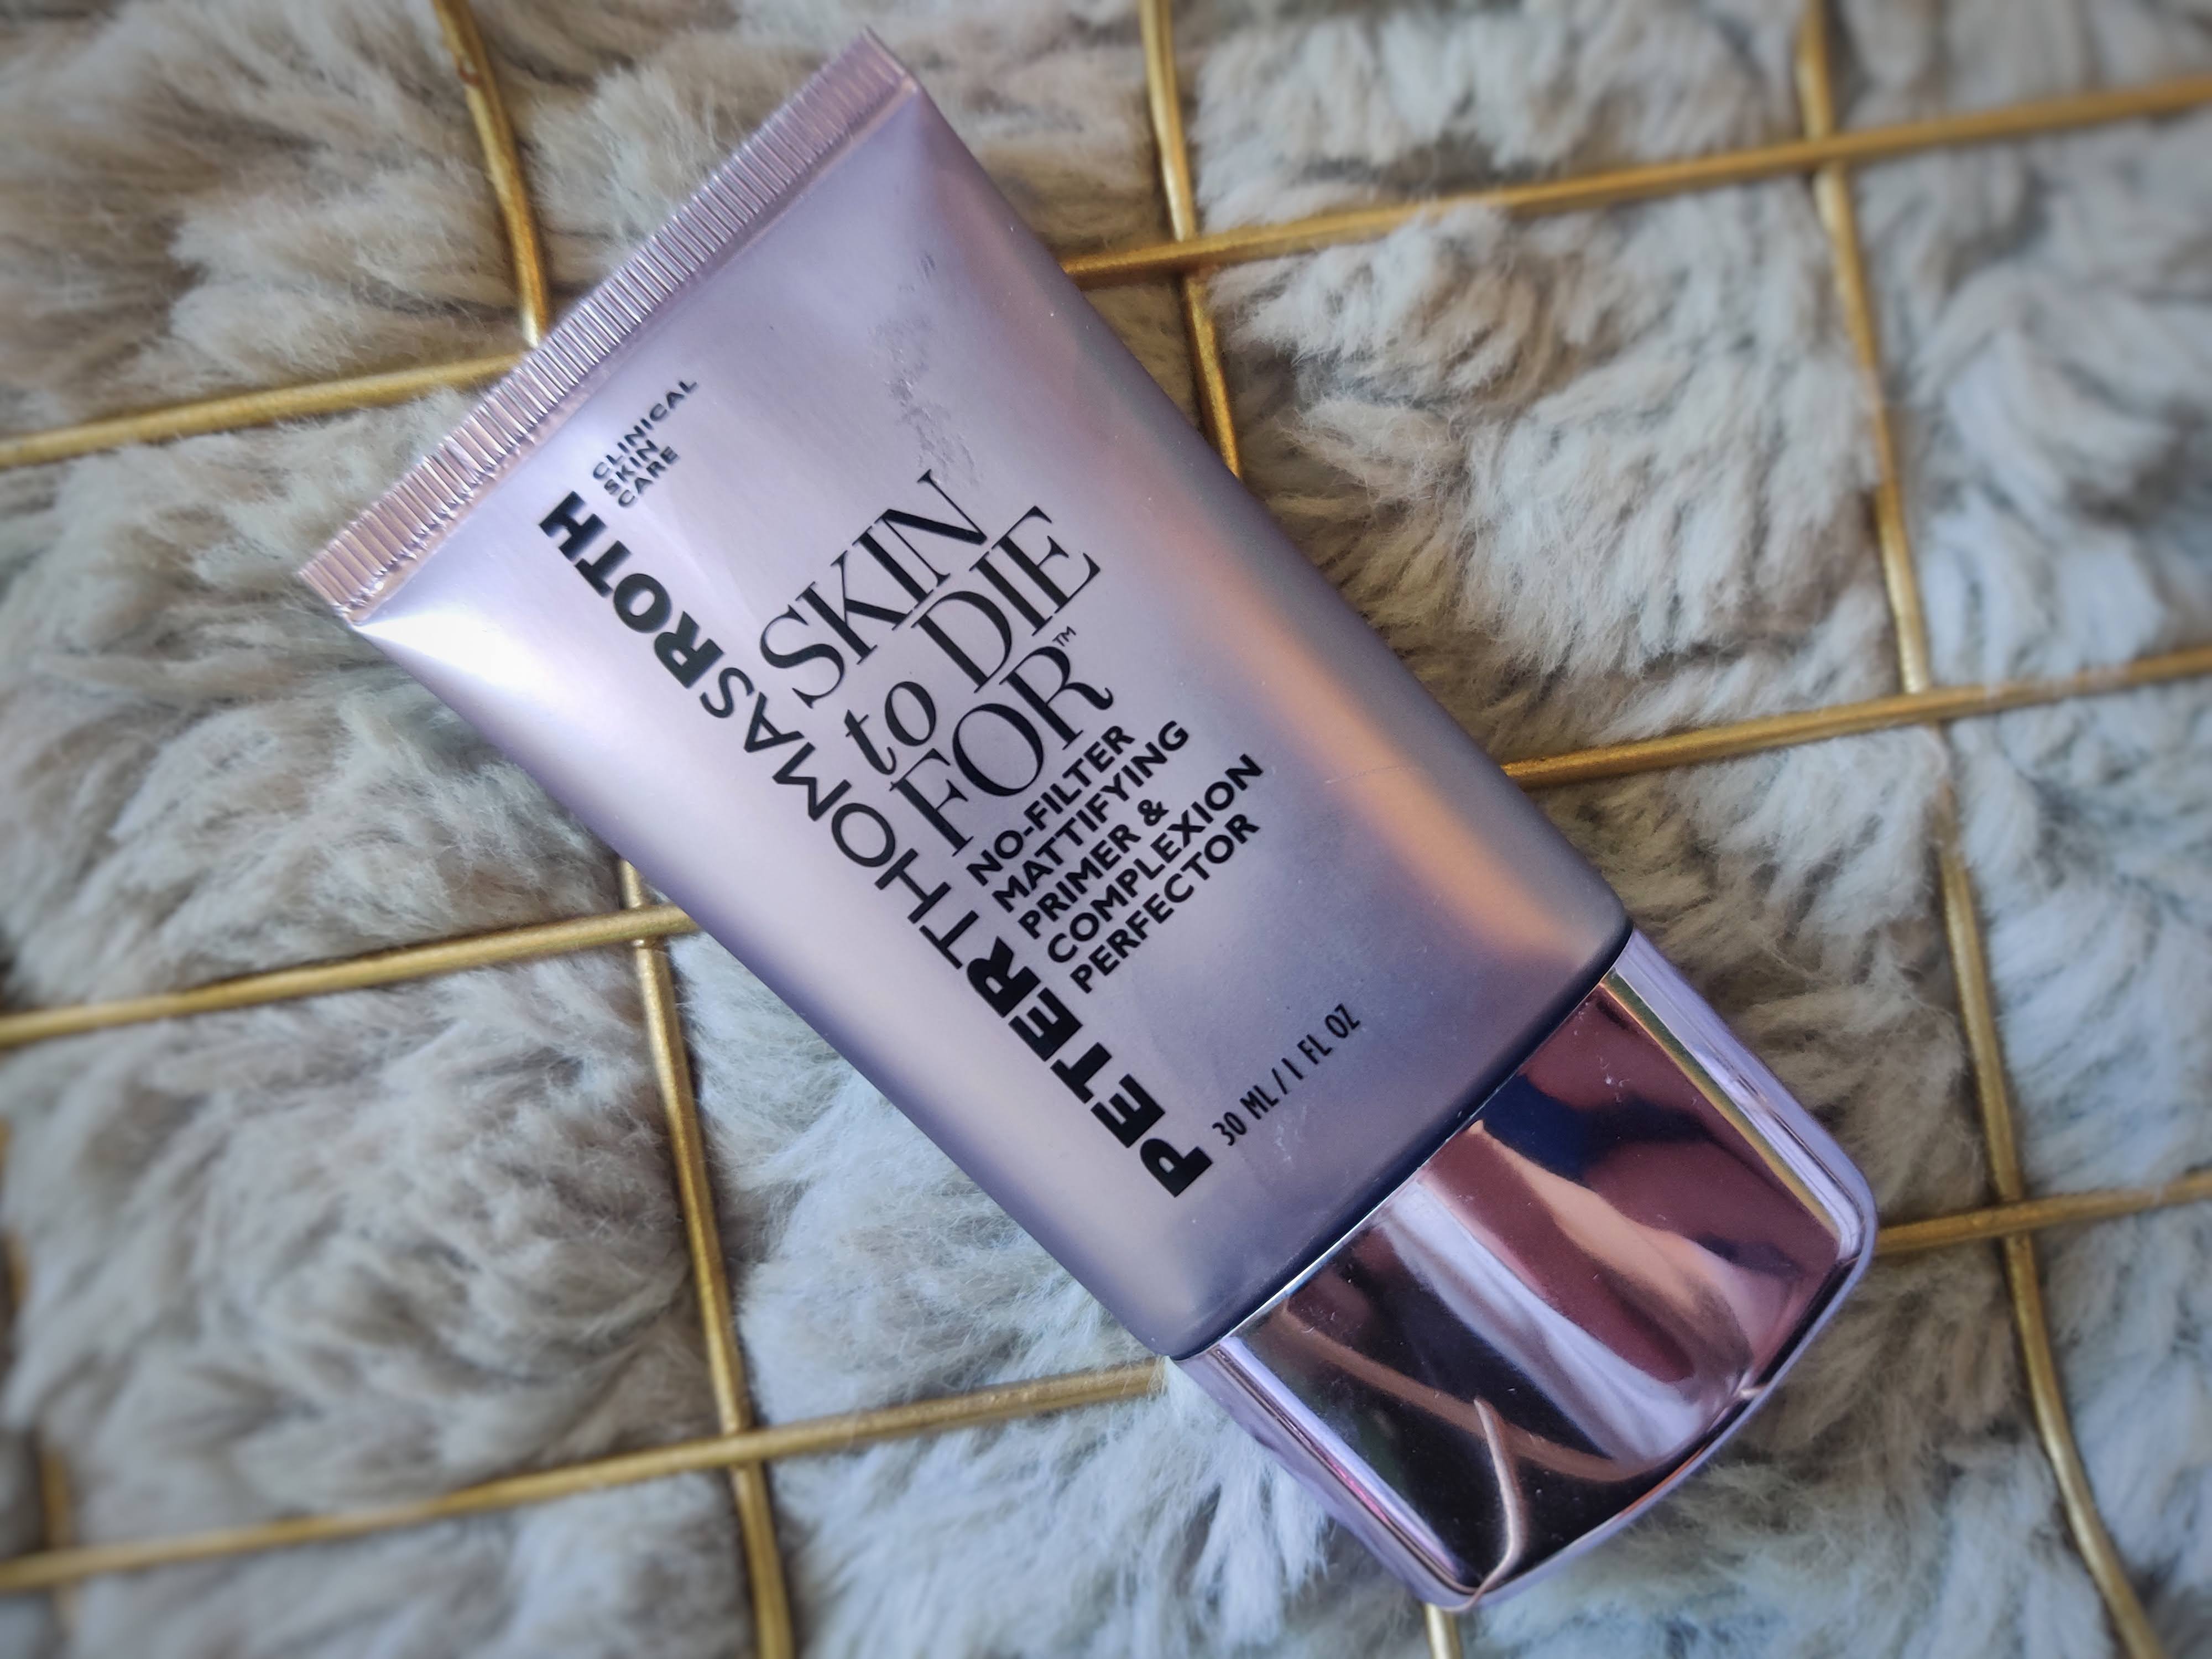 Peter Thomas Roth Skin to die for